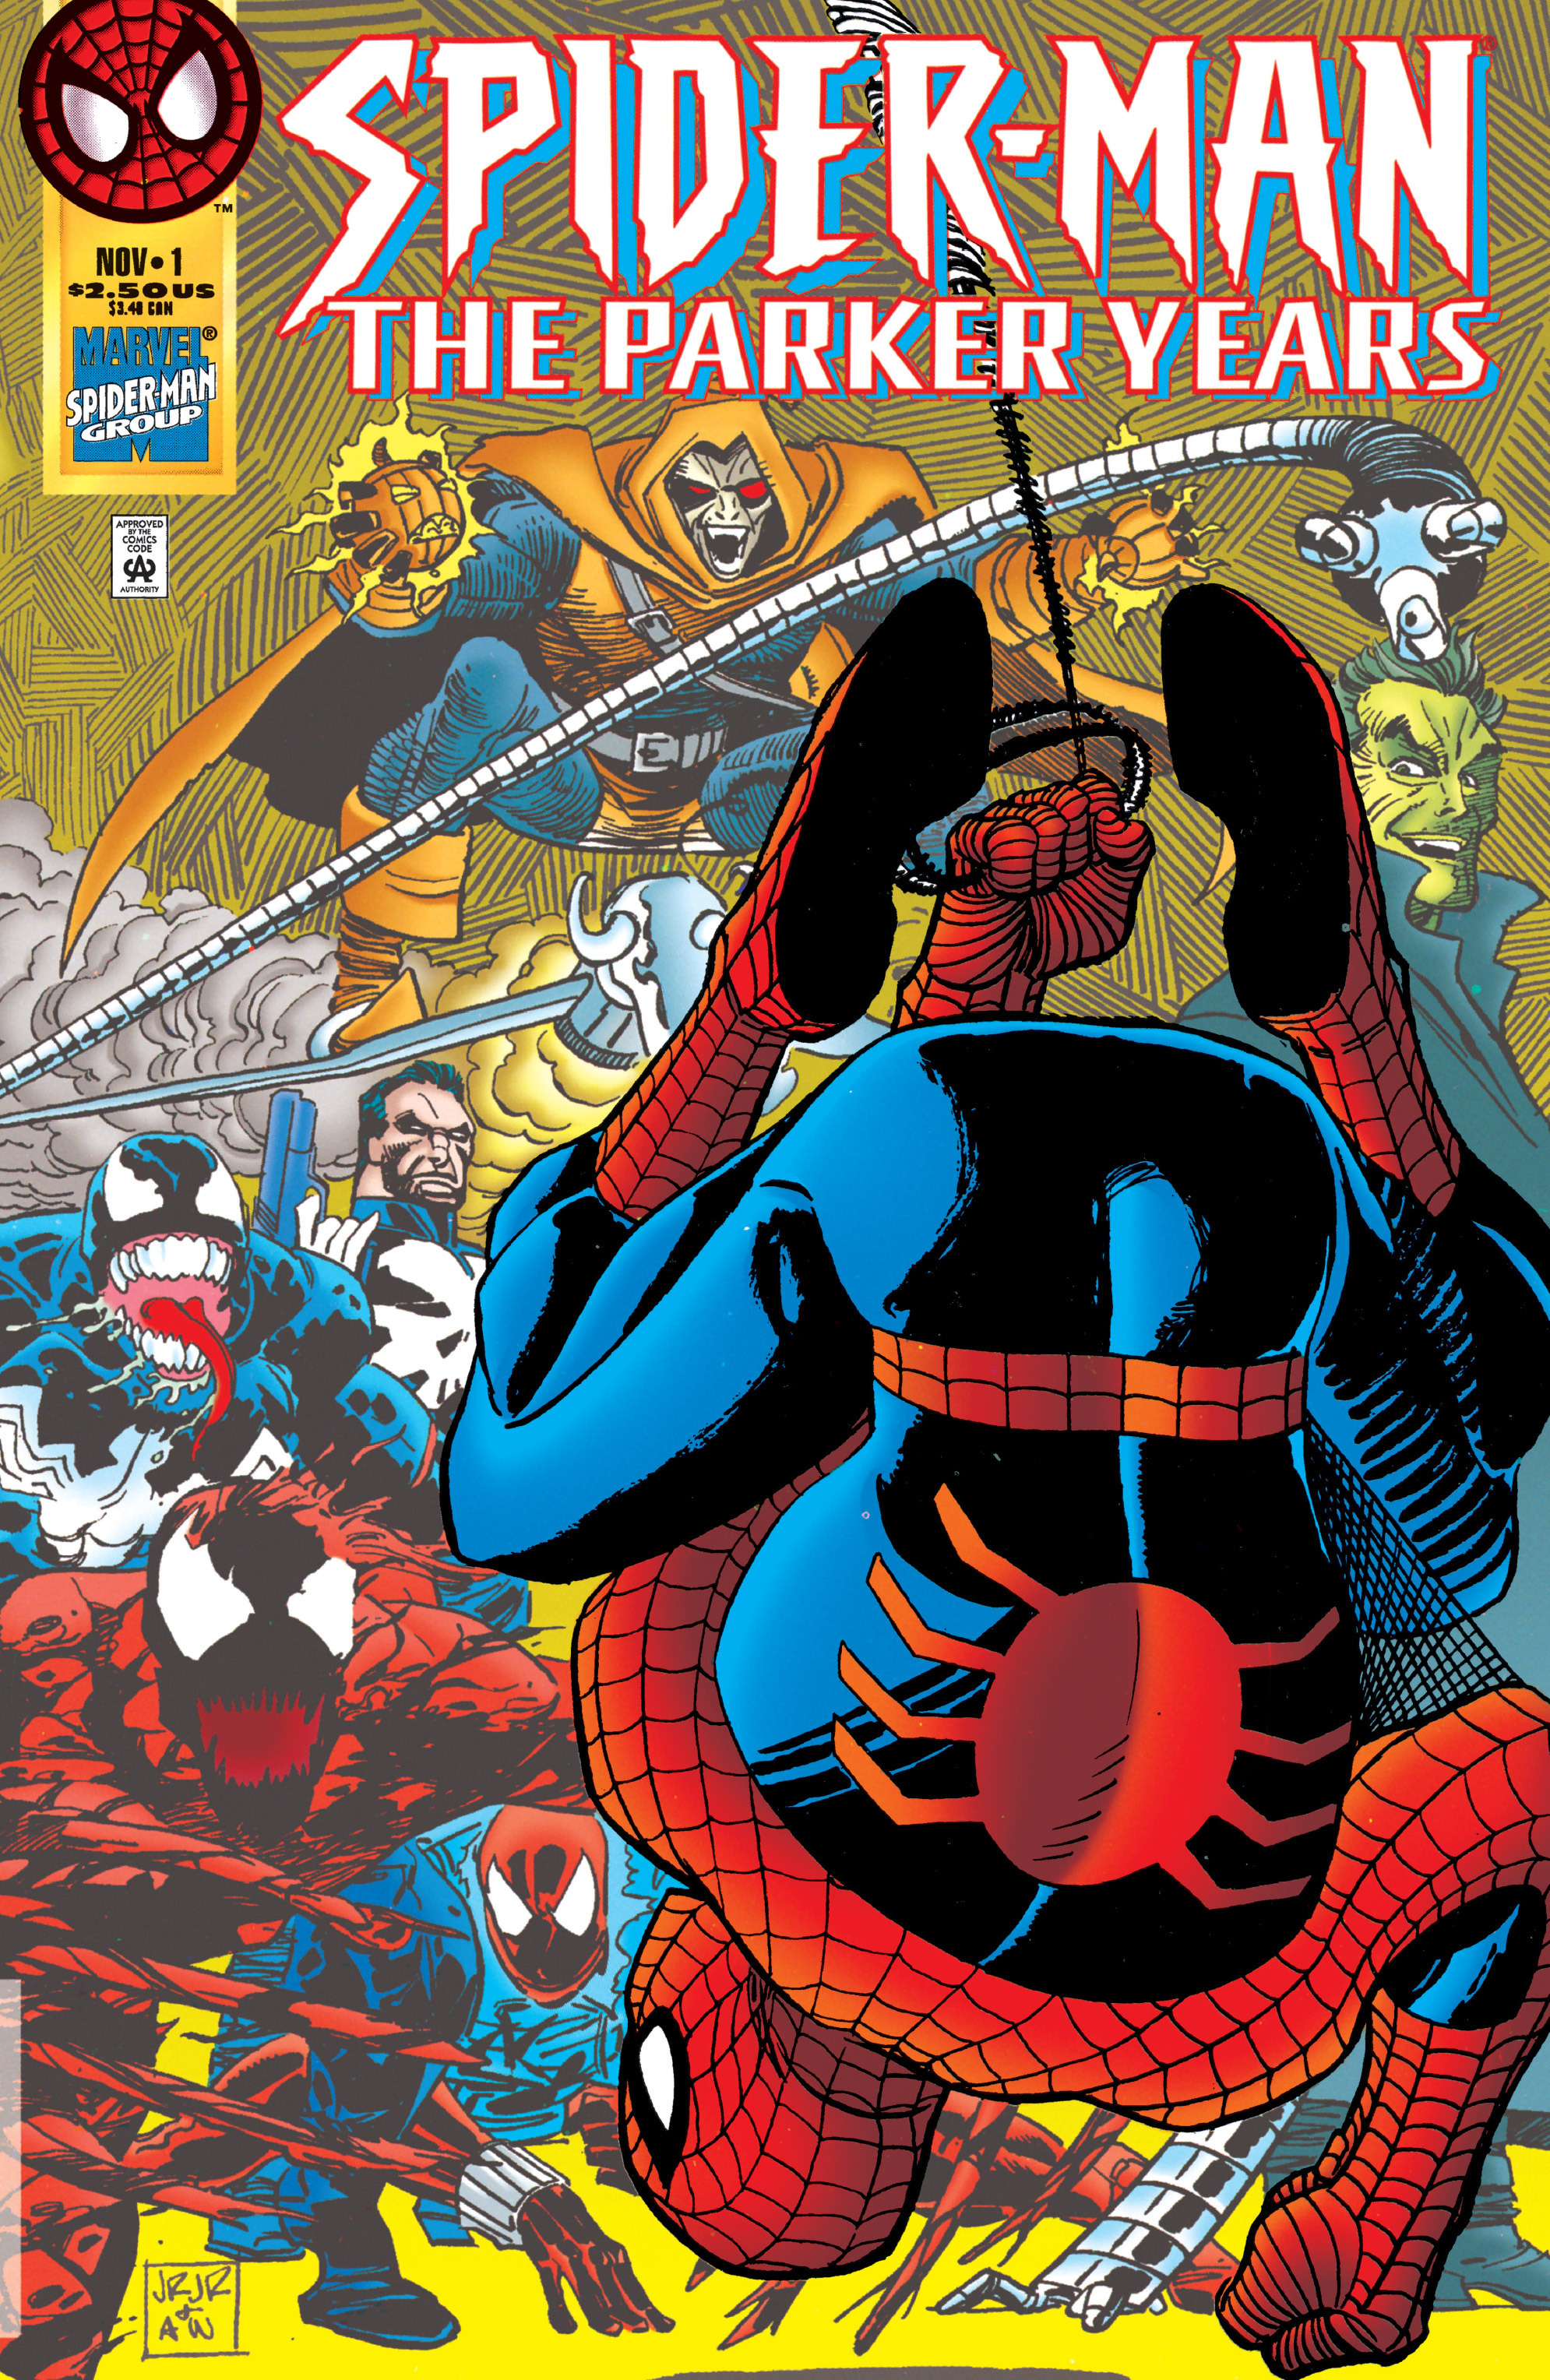 Read online Spider-Man: The Parker Years comic -  Issue # Full - 1